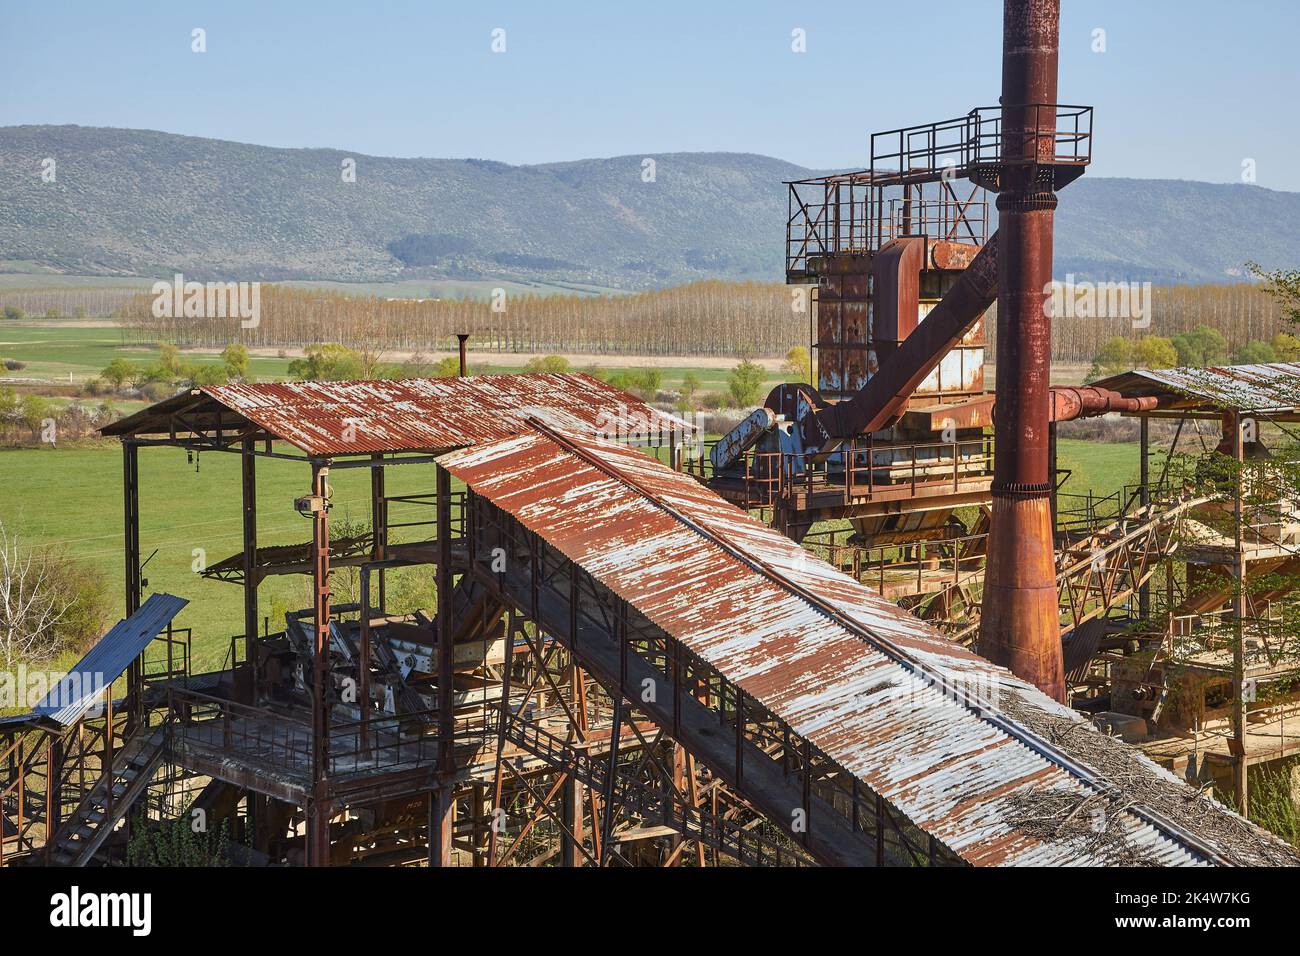 Old mining industrial facility remains Stock Photo